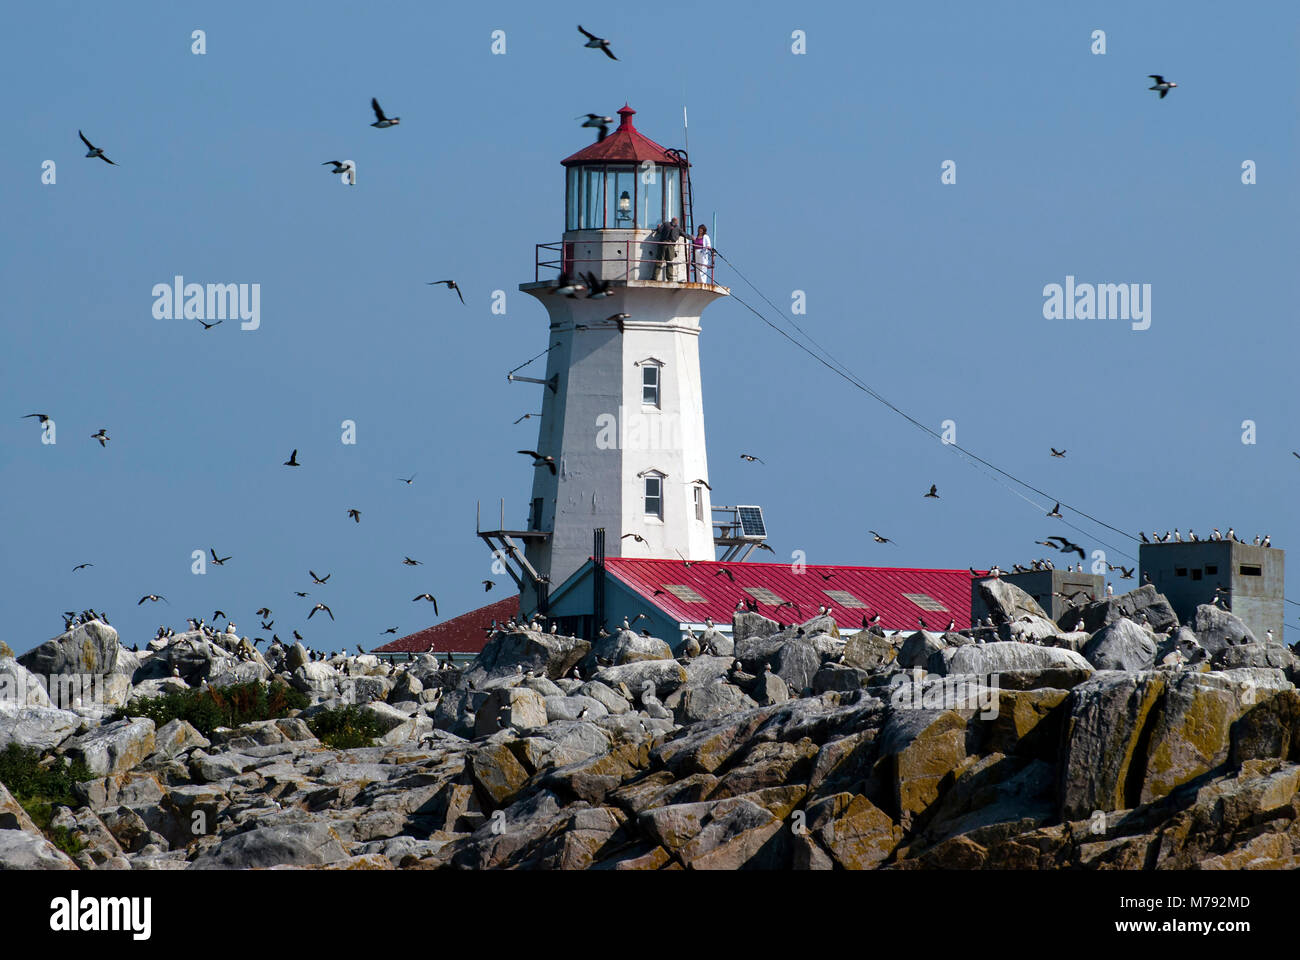 Atlantic puffins fly around old Machias Seal Island lighthouse located off the northern Maine Coast but is technically a Canadian lighthouse. Stock Photo